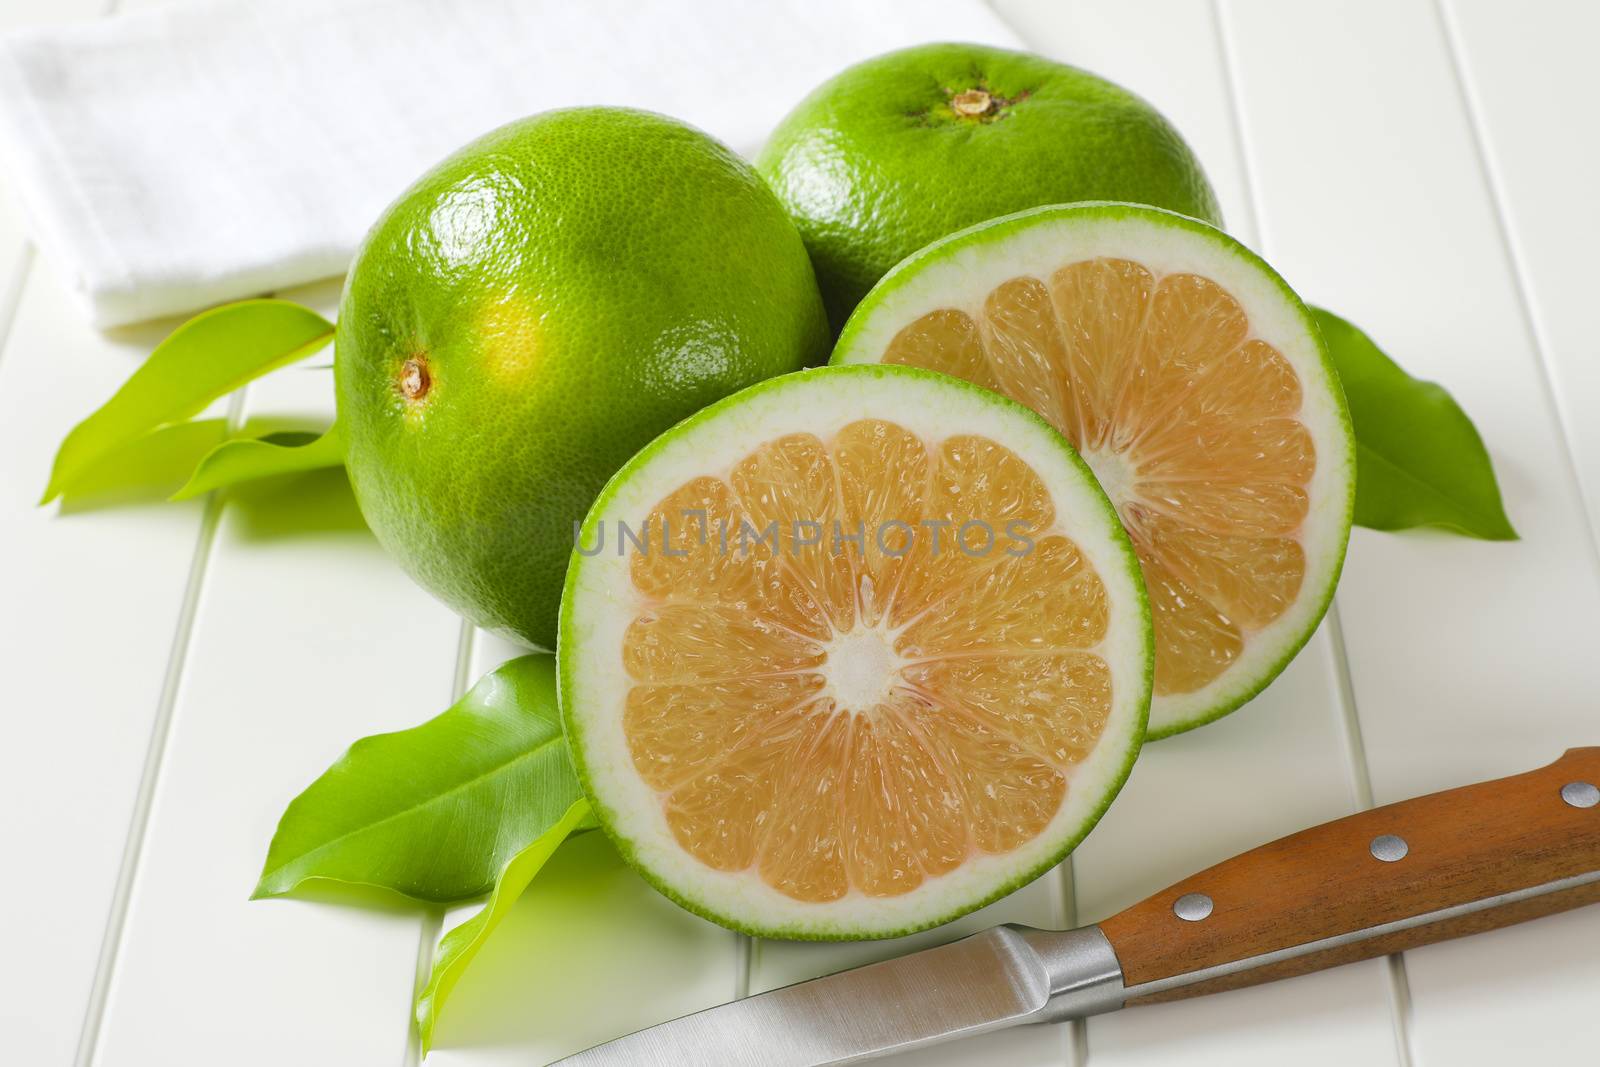 Sweetie fruits (green grapefruits, pomelits) - two whole fruits and slices